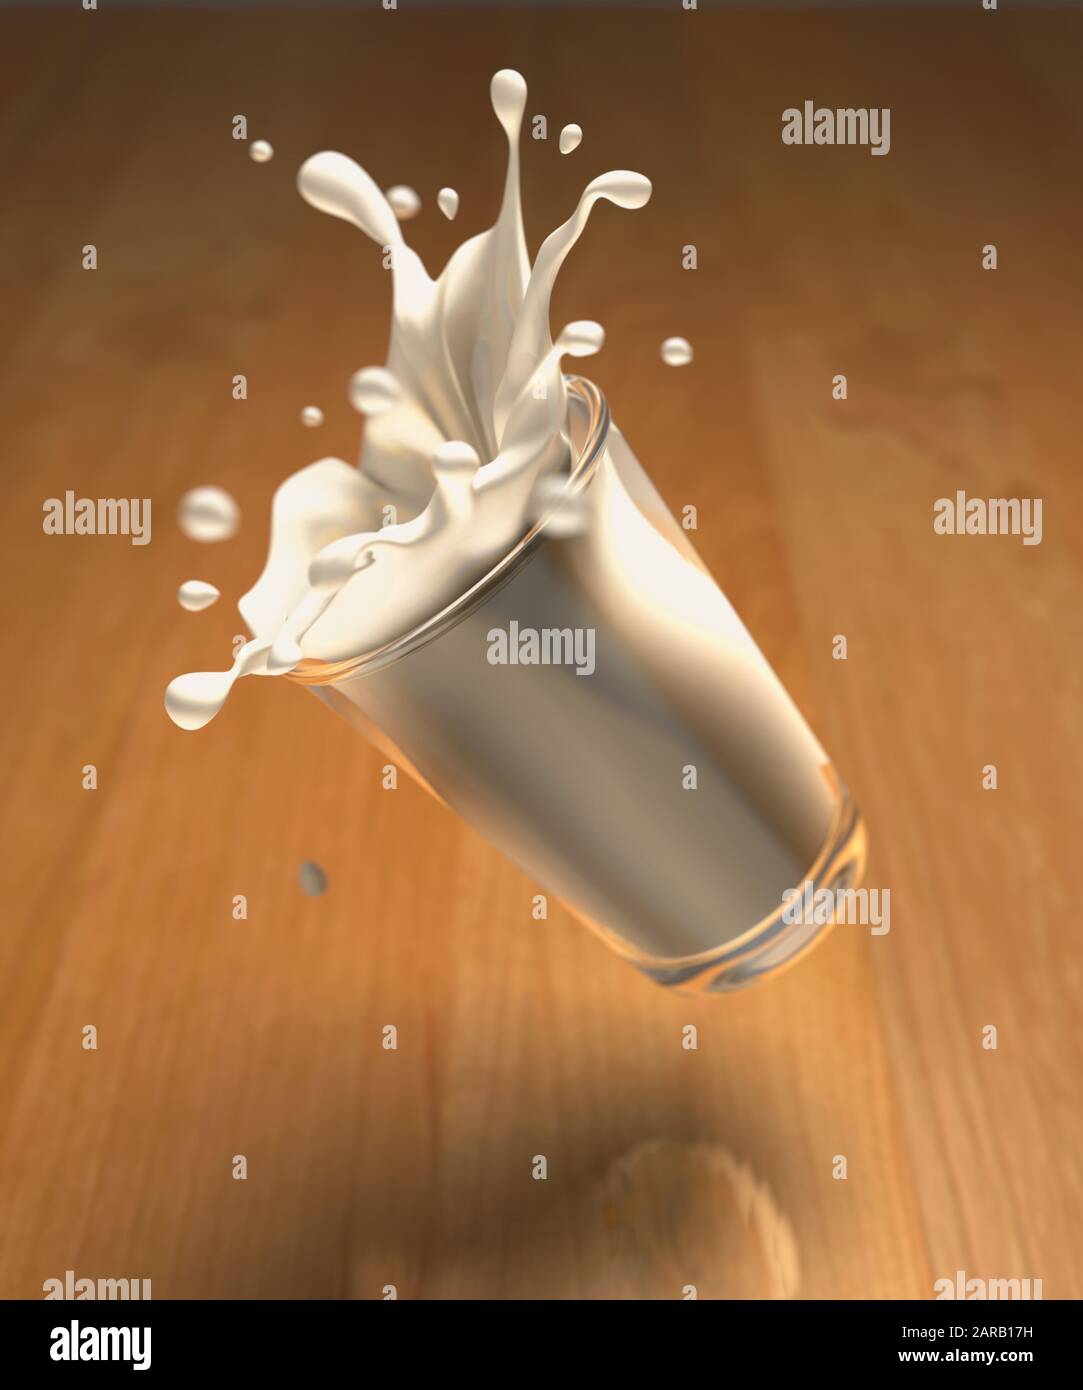 No use crying over split milk. Glass of milk falling onto a wooden floor Stock Photo